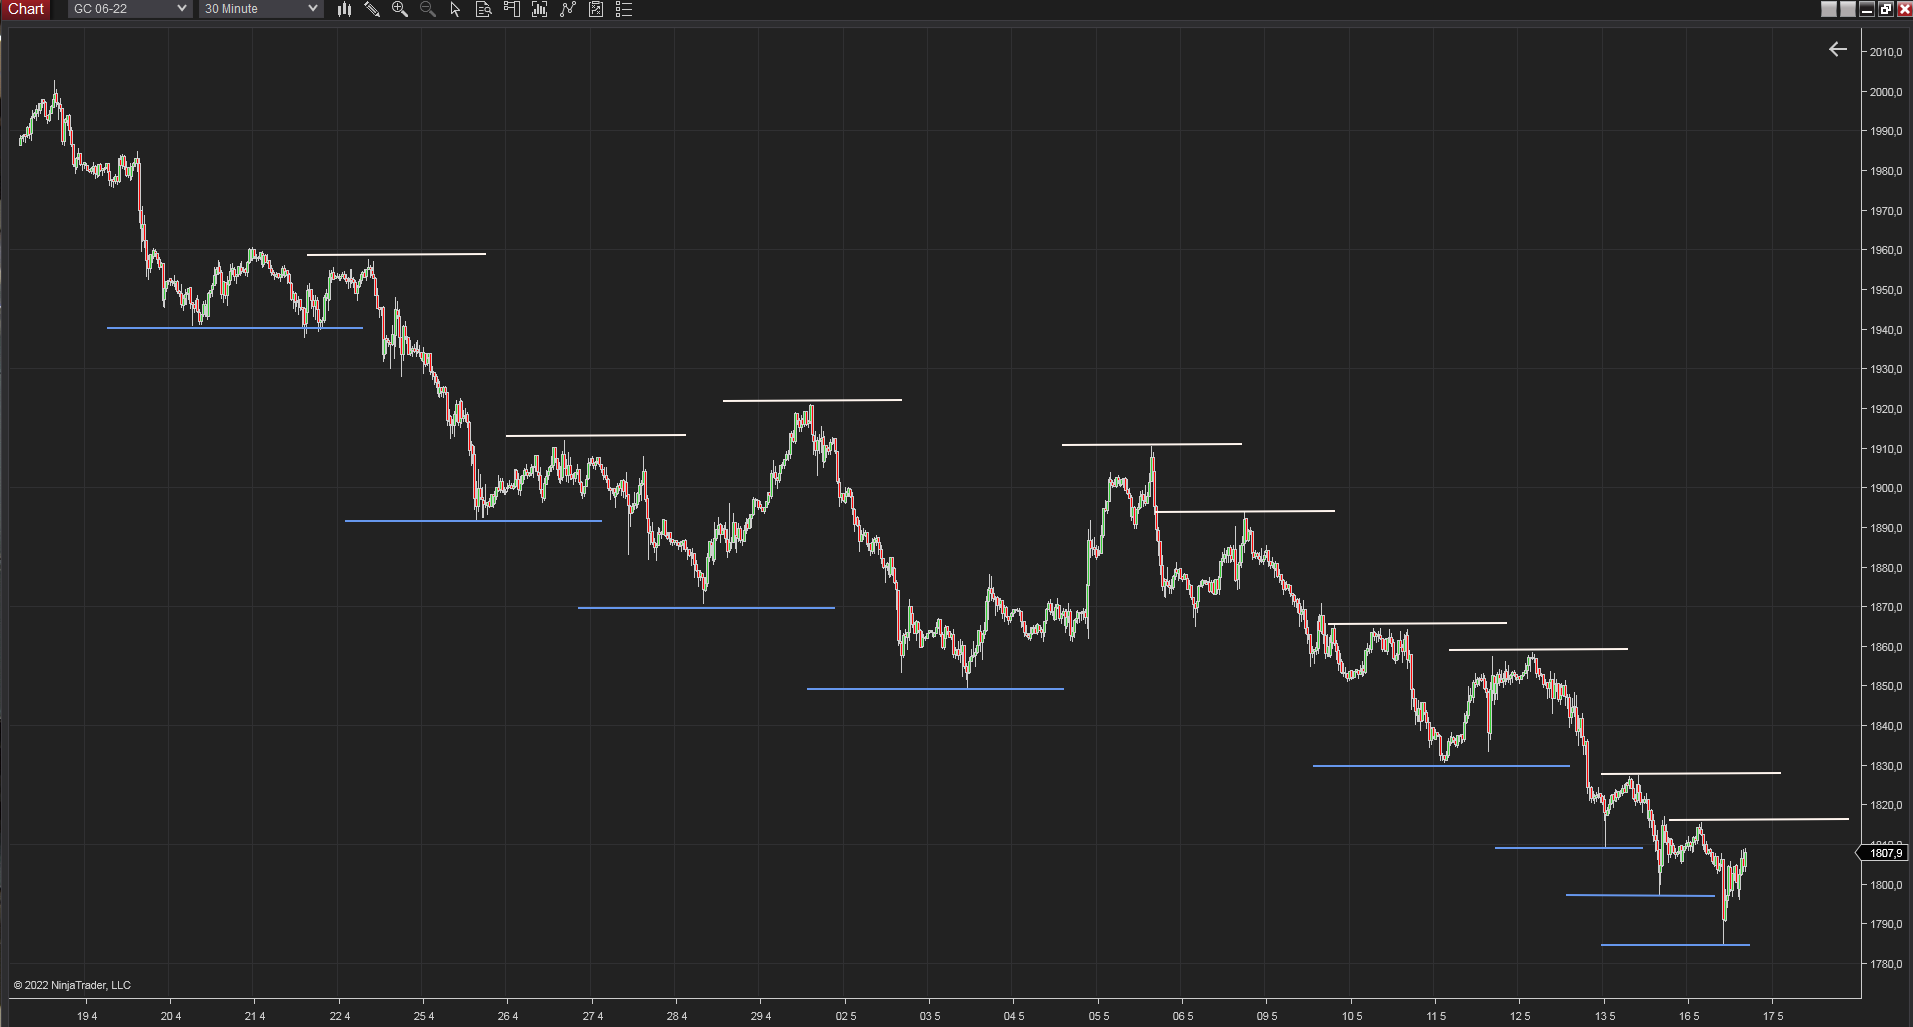 30 minutes chart of GC (gold futures), Downtrend. Source: Author´s analysis